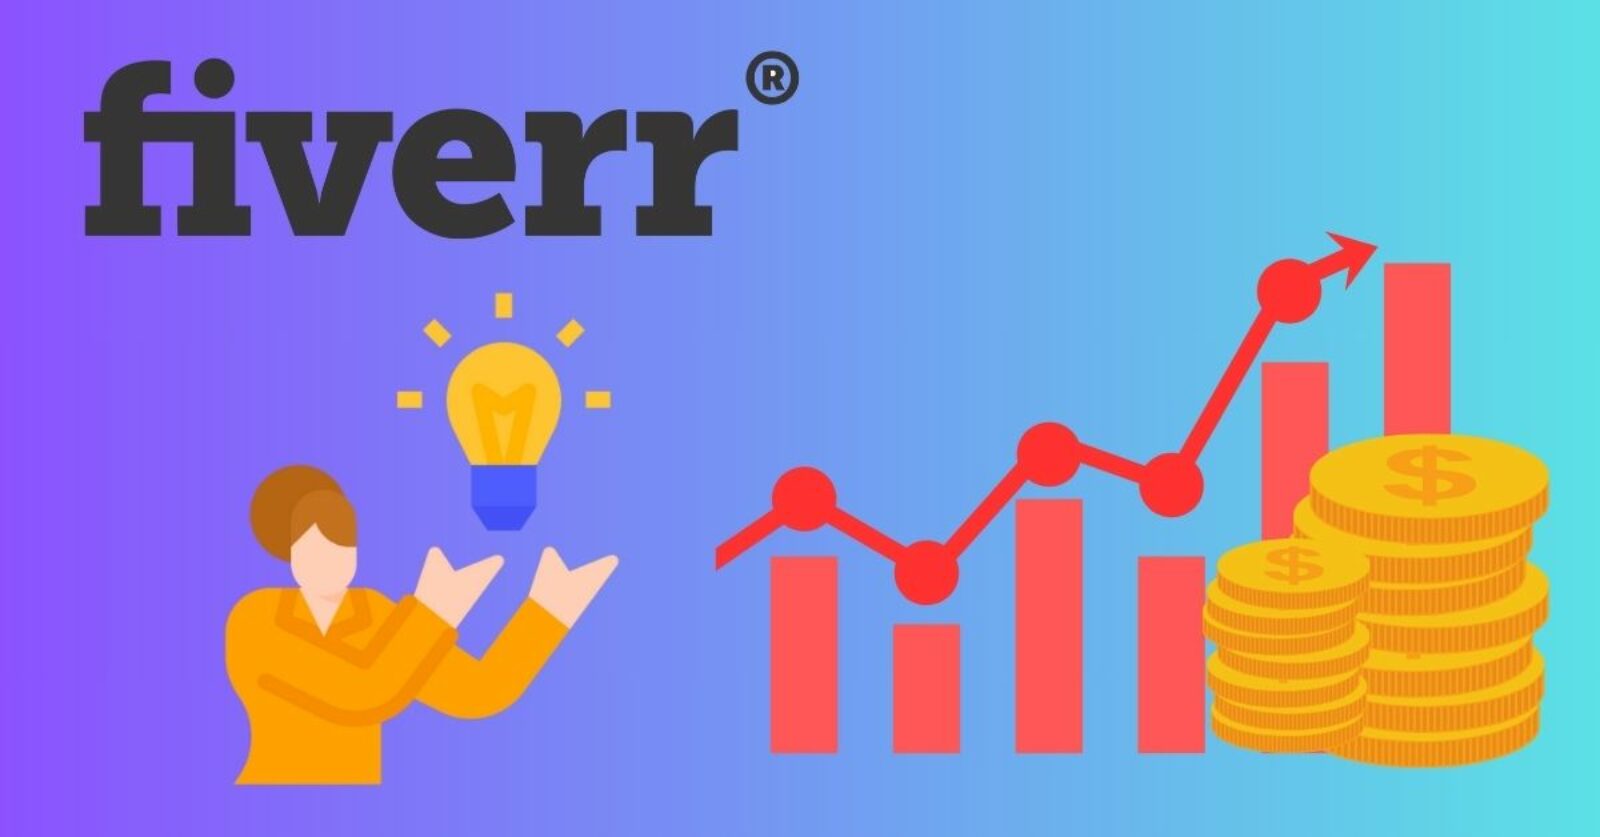 Make money on fiverr without skills